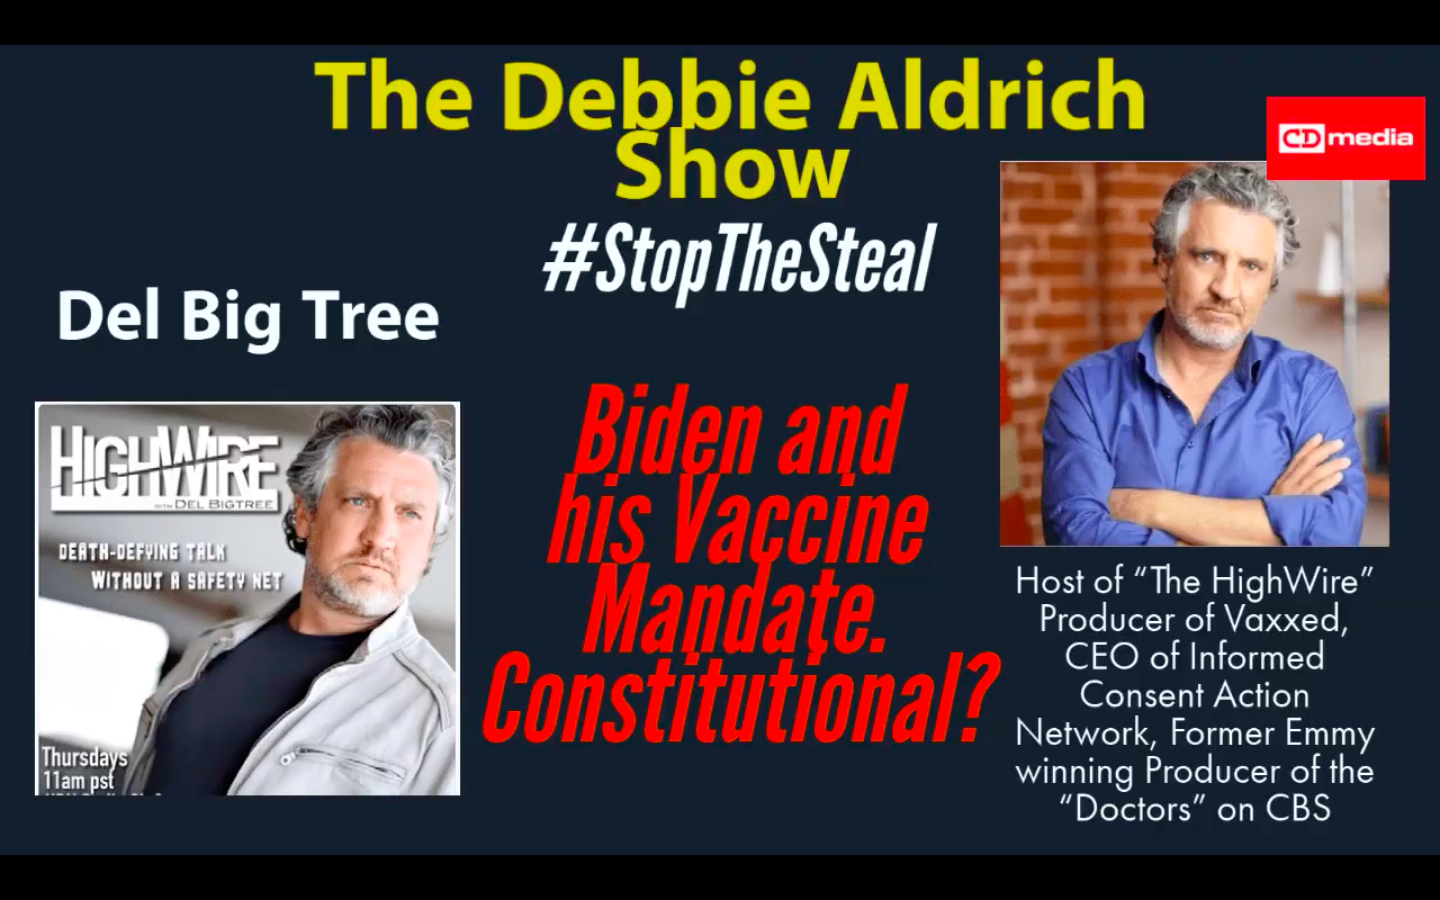 Debbie Aldrich With Guest Del Big Tree Host of The HighWire, Producer of Vaxxed, CEO of Informed Consent Action Network, Former Emmy winning Producer of 'The Doctors' on CBS